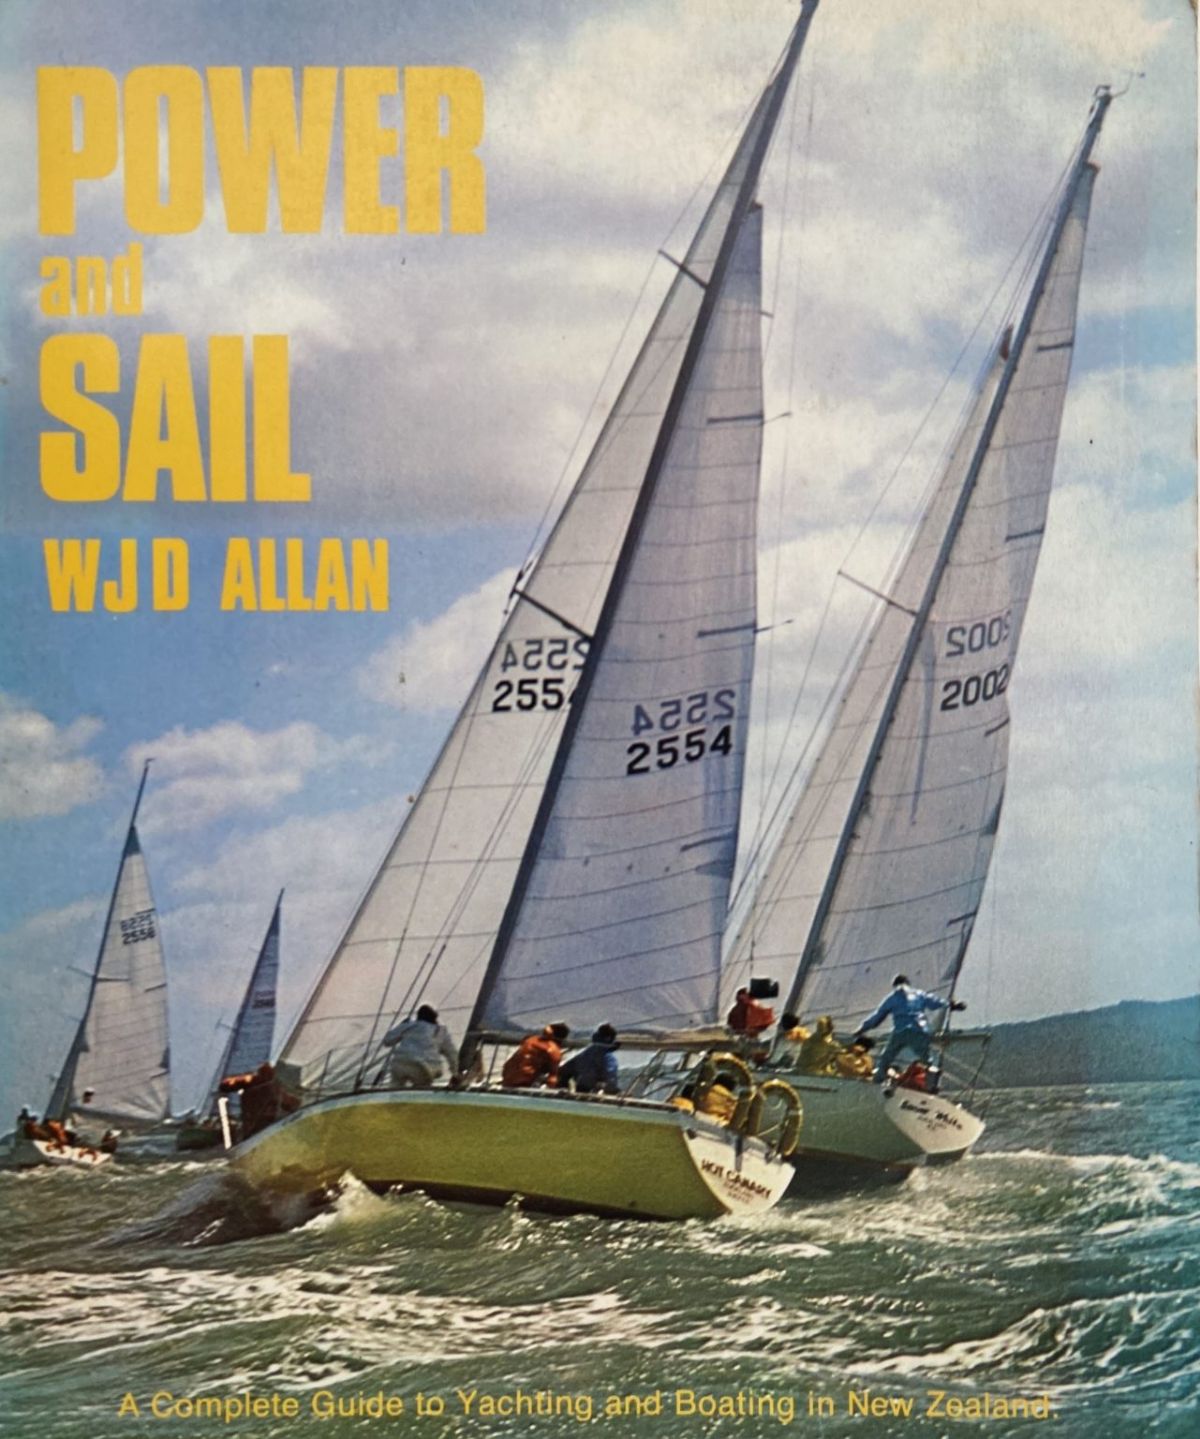 POWER AND SAIL